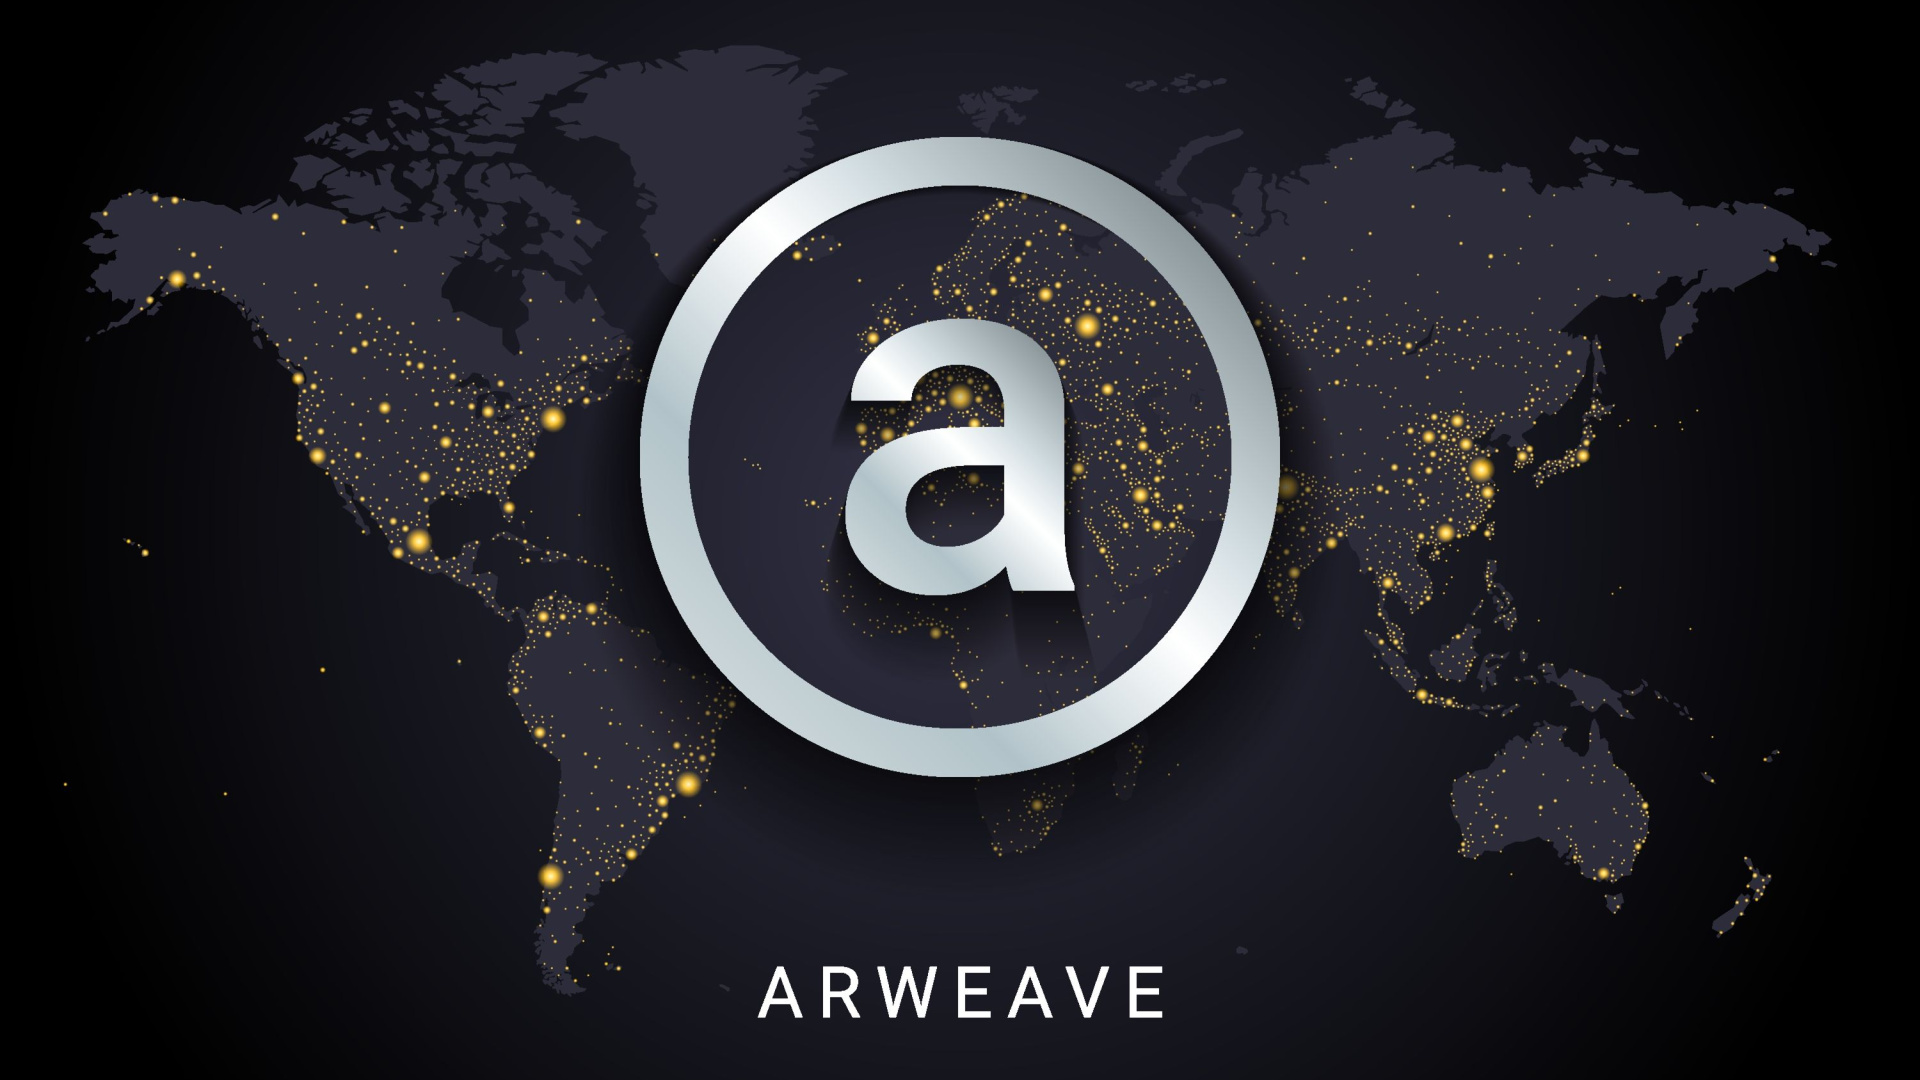 Instagram – Arweave (AR) selected by Meta for storing its NFTs